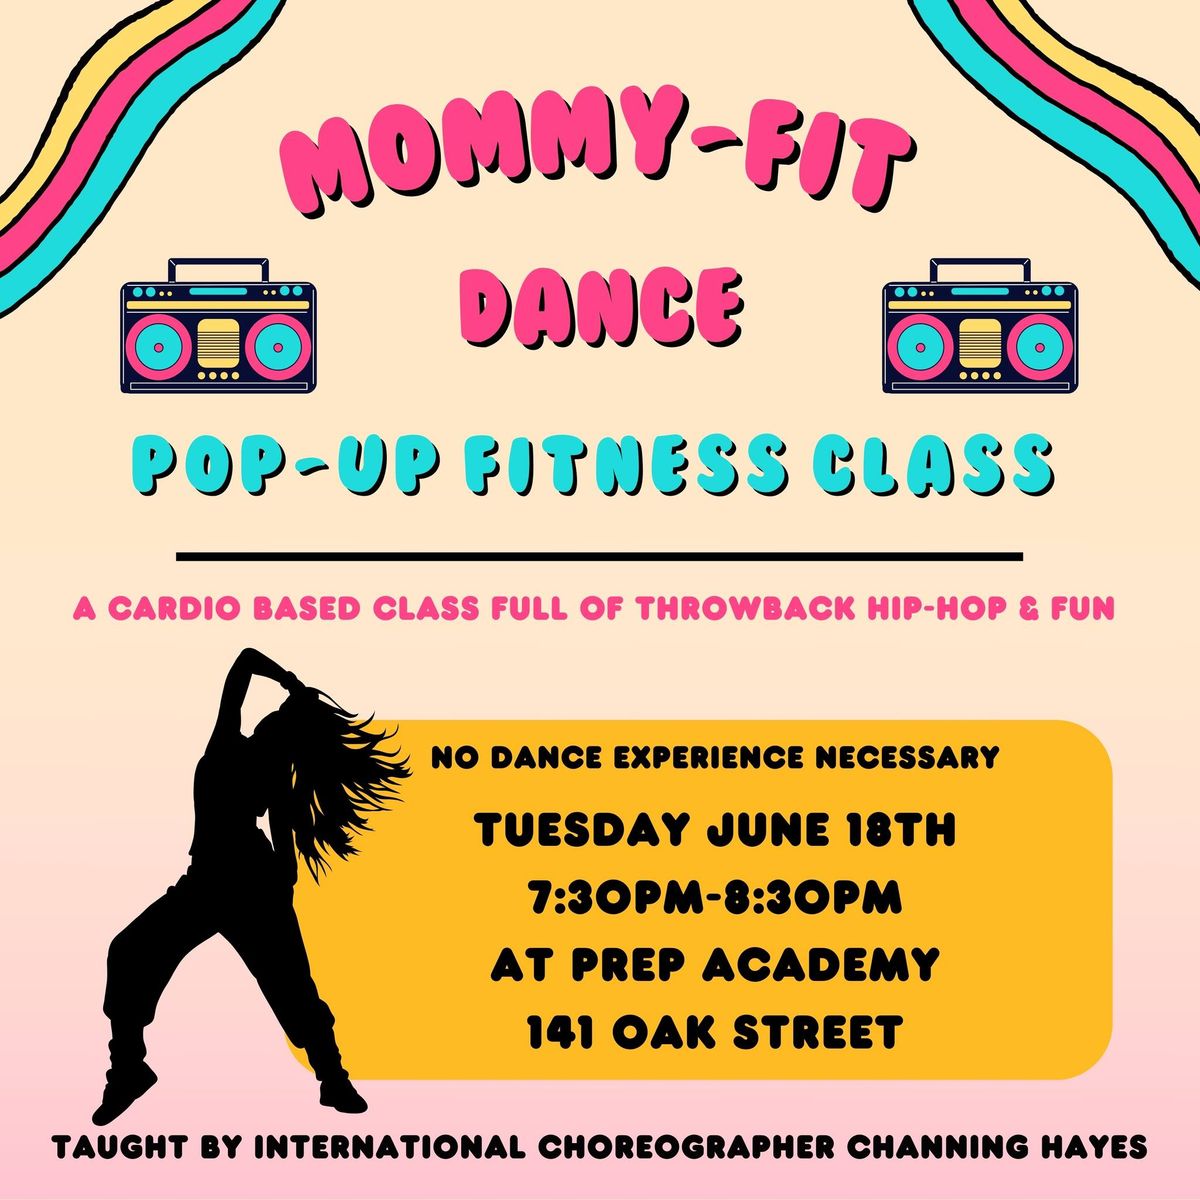 Mommy-Fit Adult Dance Fitness Class